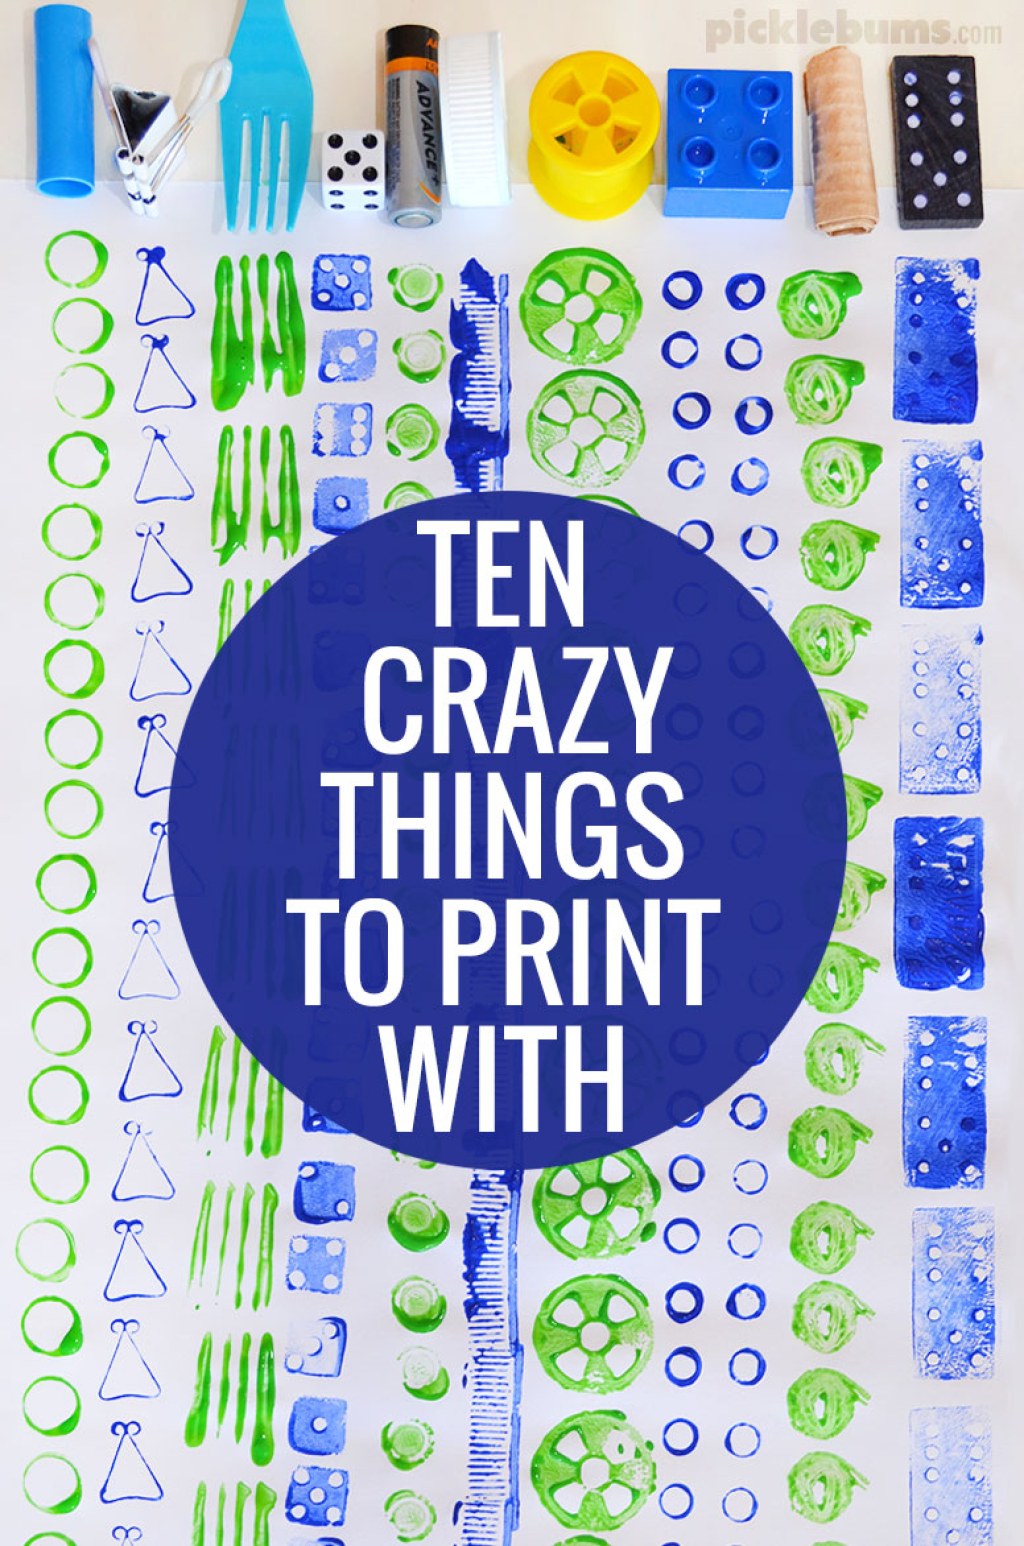 Picture of: Ten Crazy Things to Print With – Picklebums